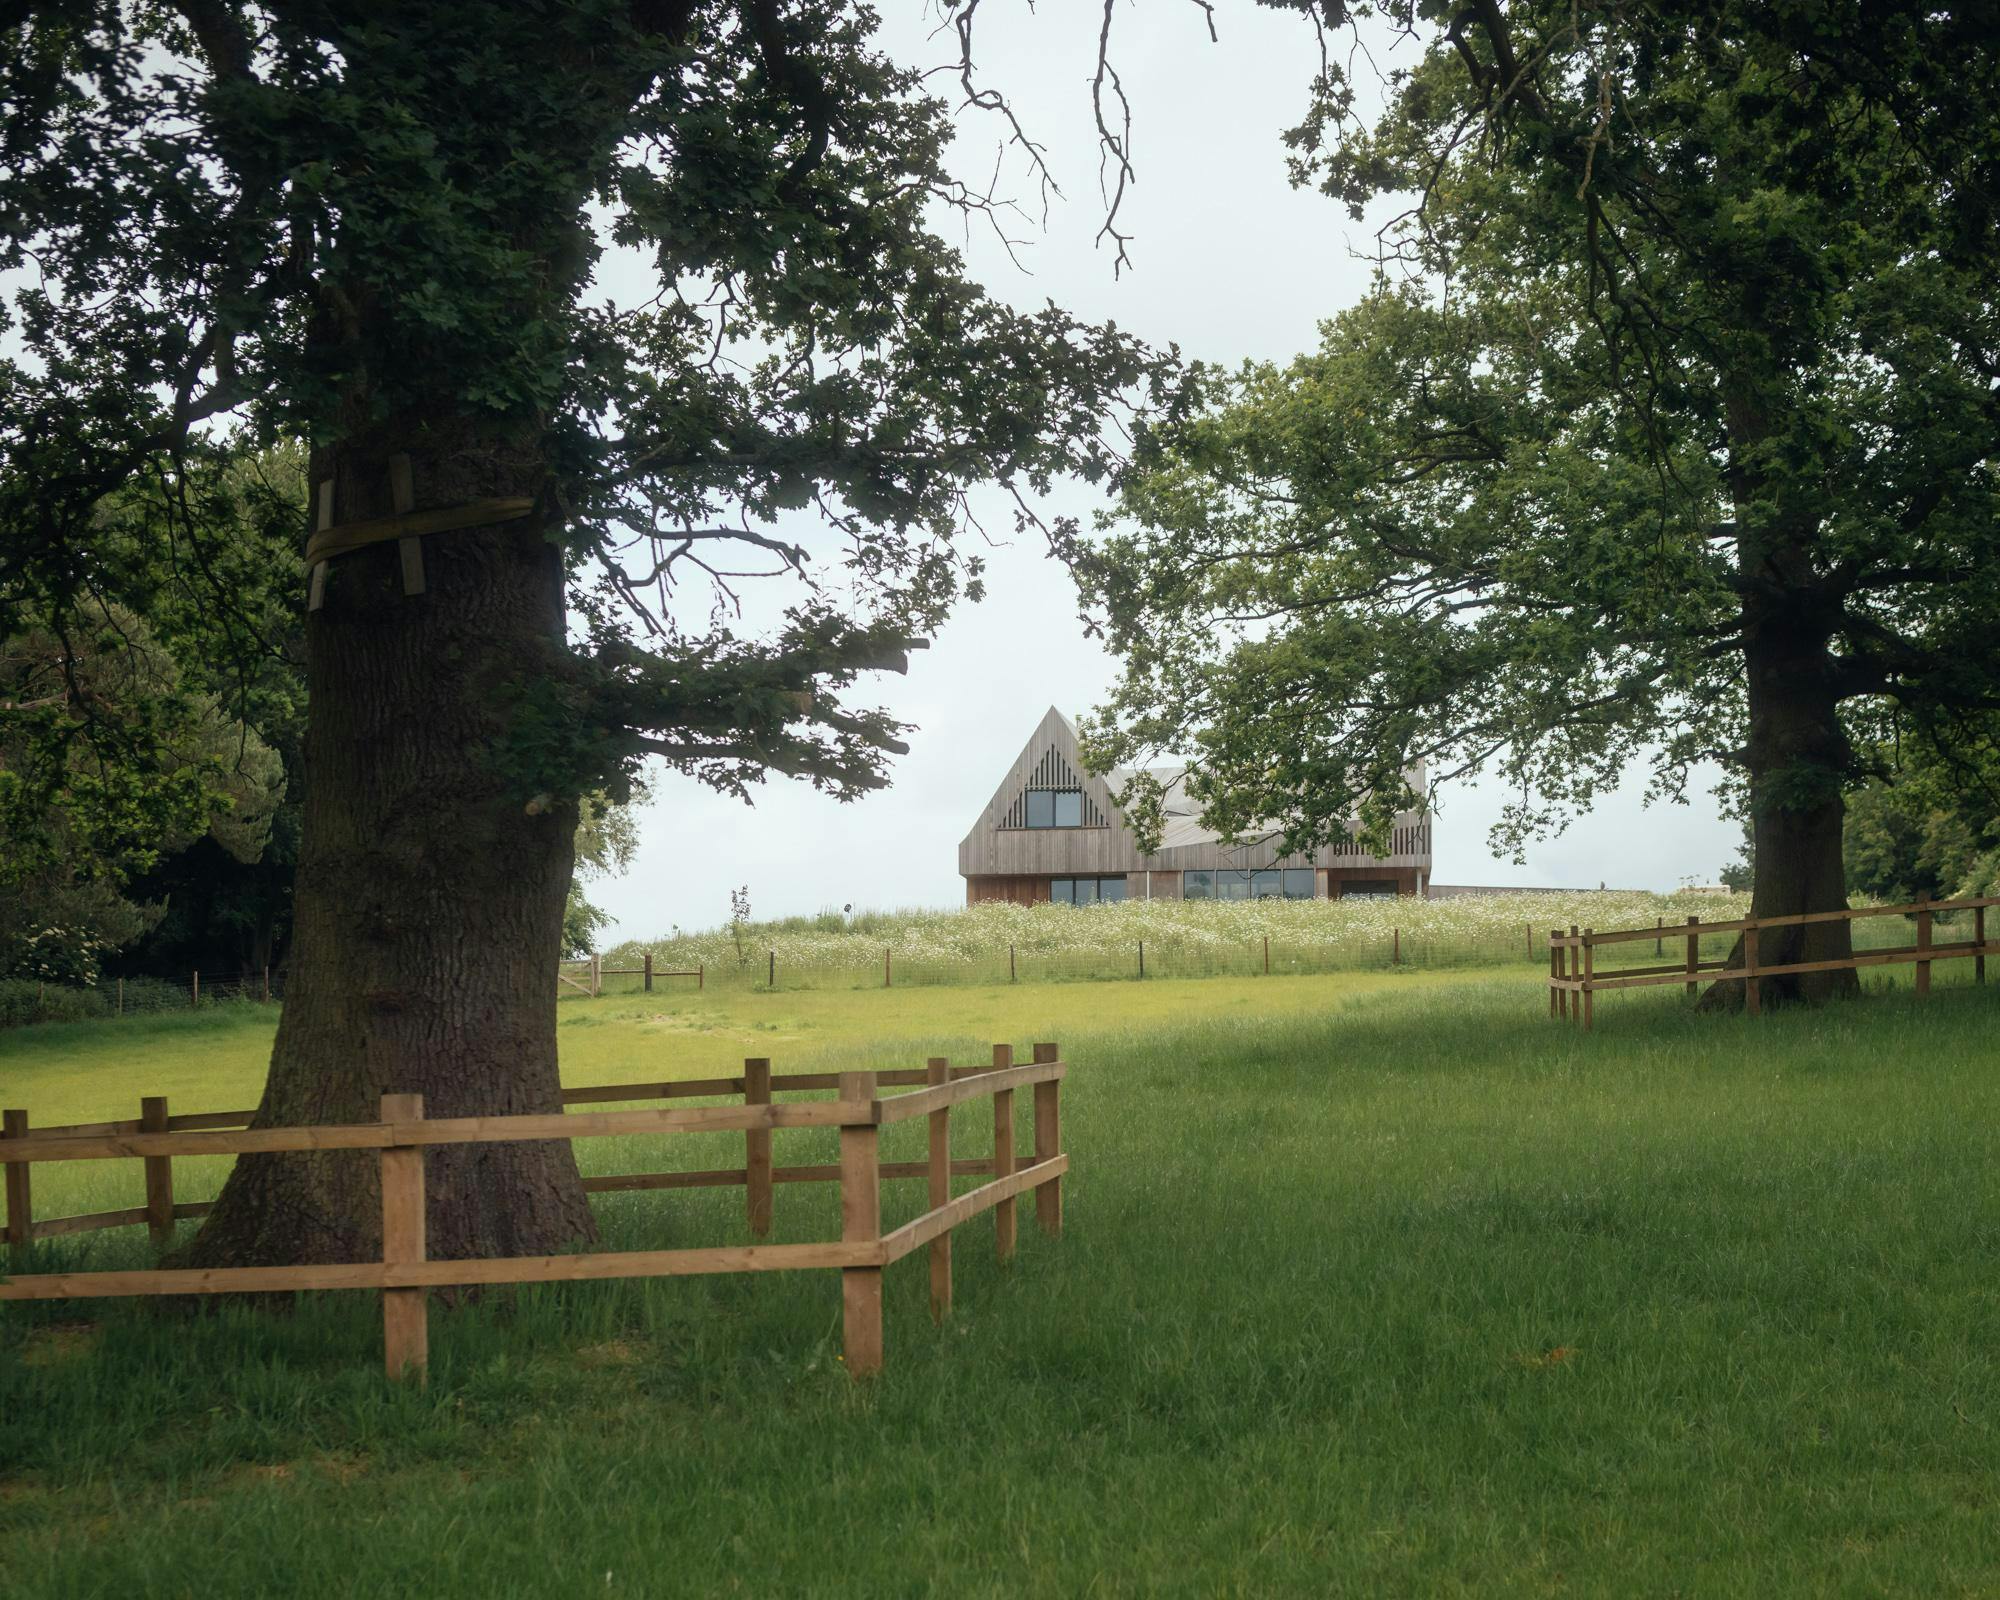 Distance view of Water Farm with oak trees